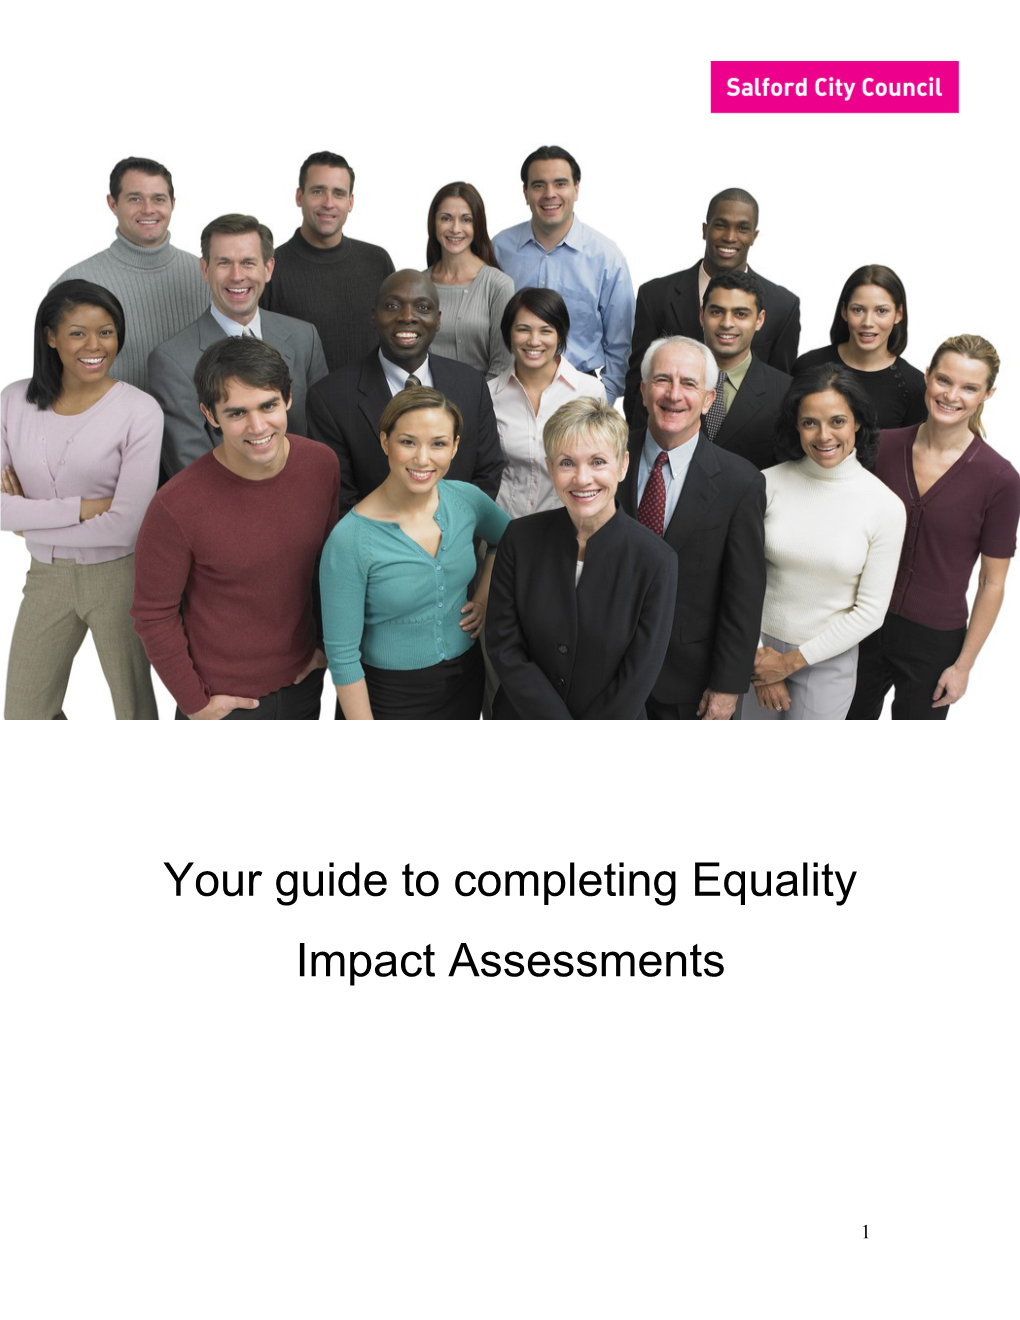 Your Guide to Completing Equality Impact Assessments